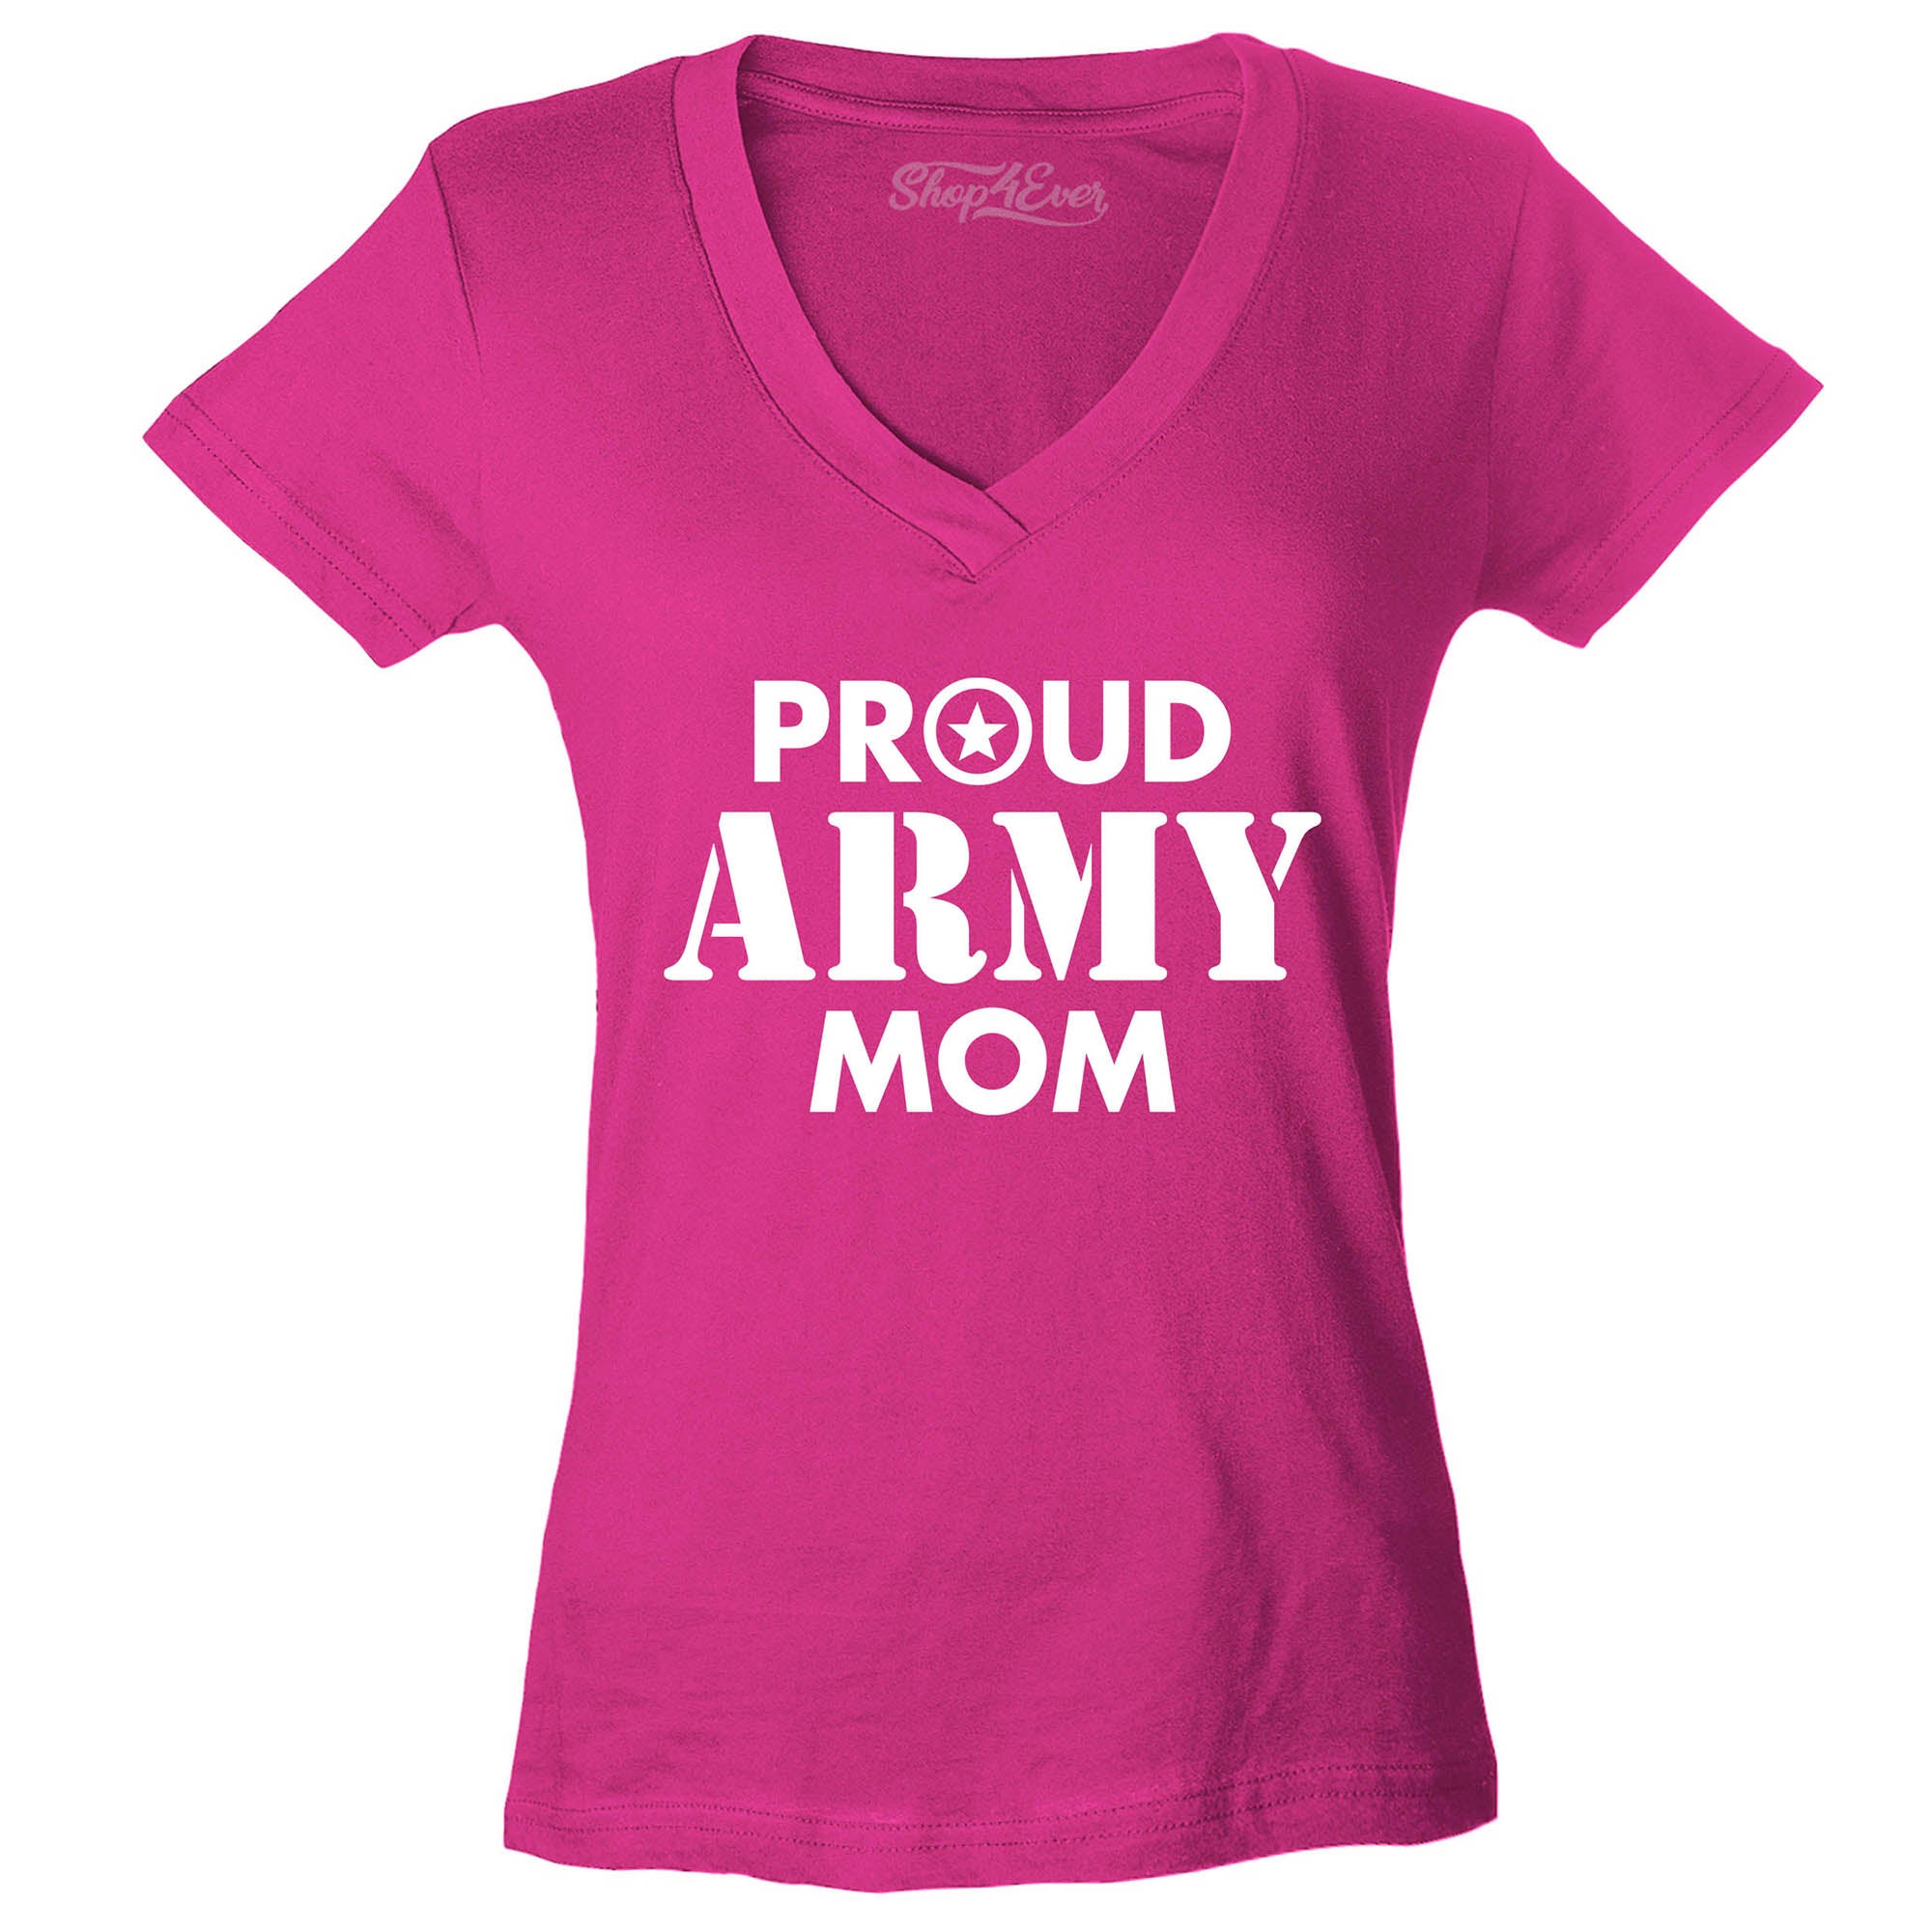 Proud Army Mom Women's V-Neck T-Shirt Slim Fit